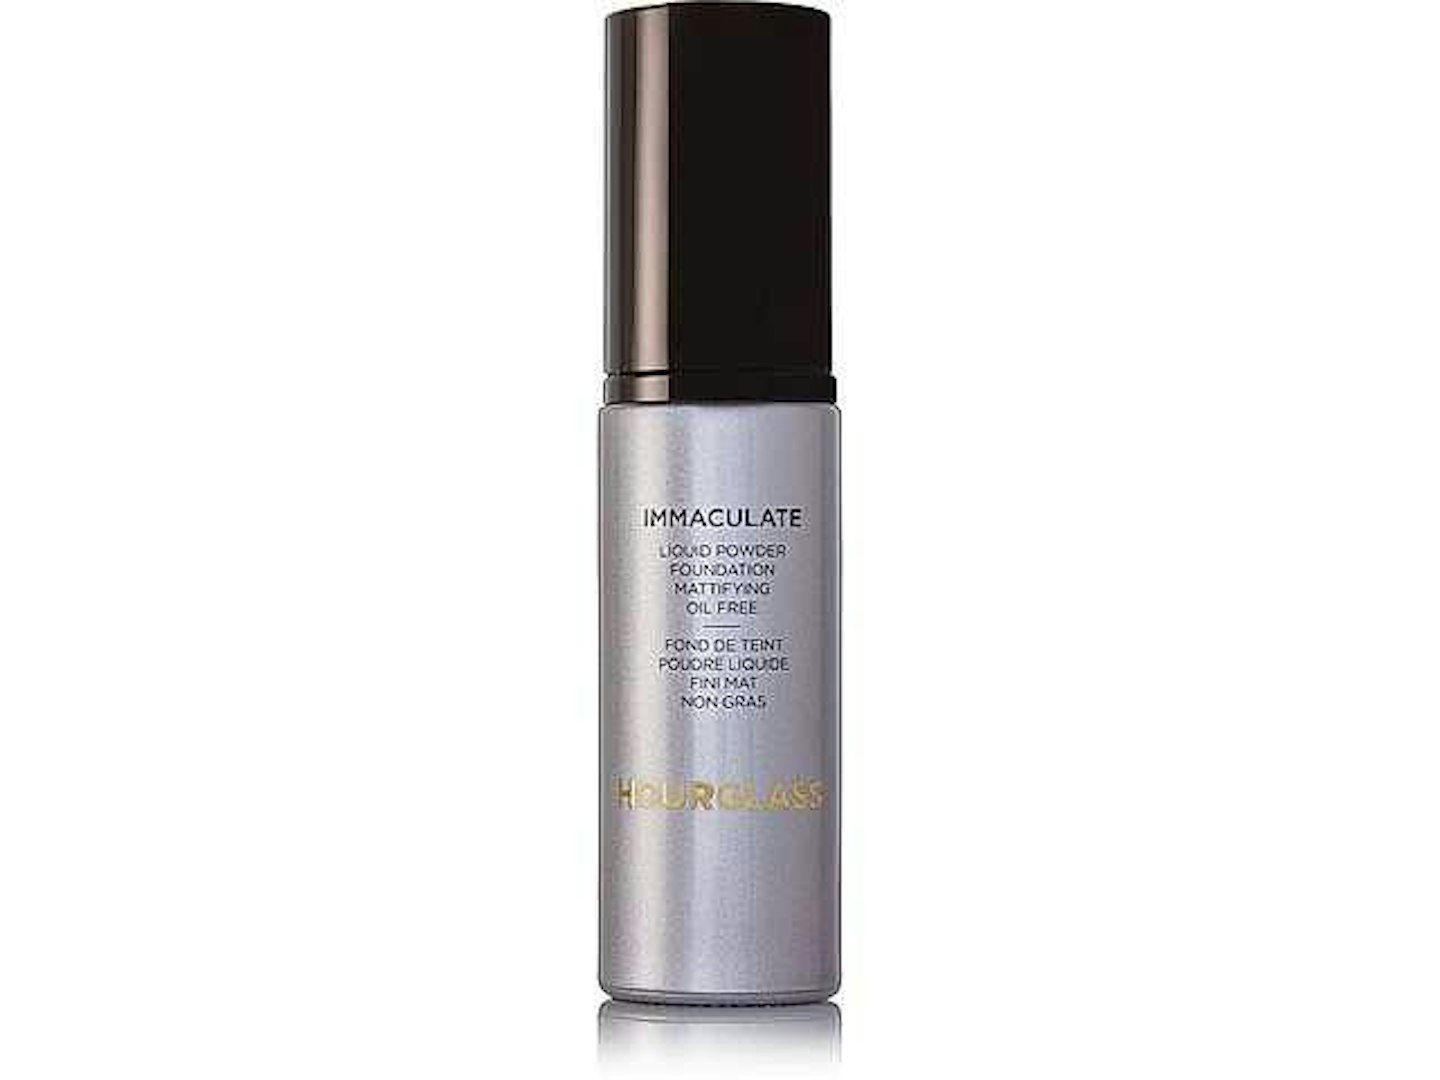 Best foundation for oily skin - Hourglass